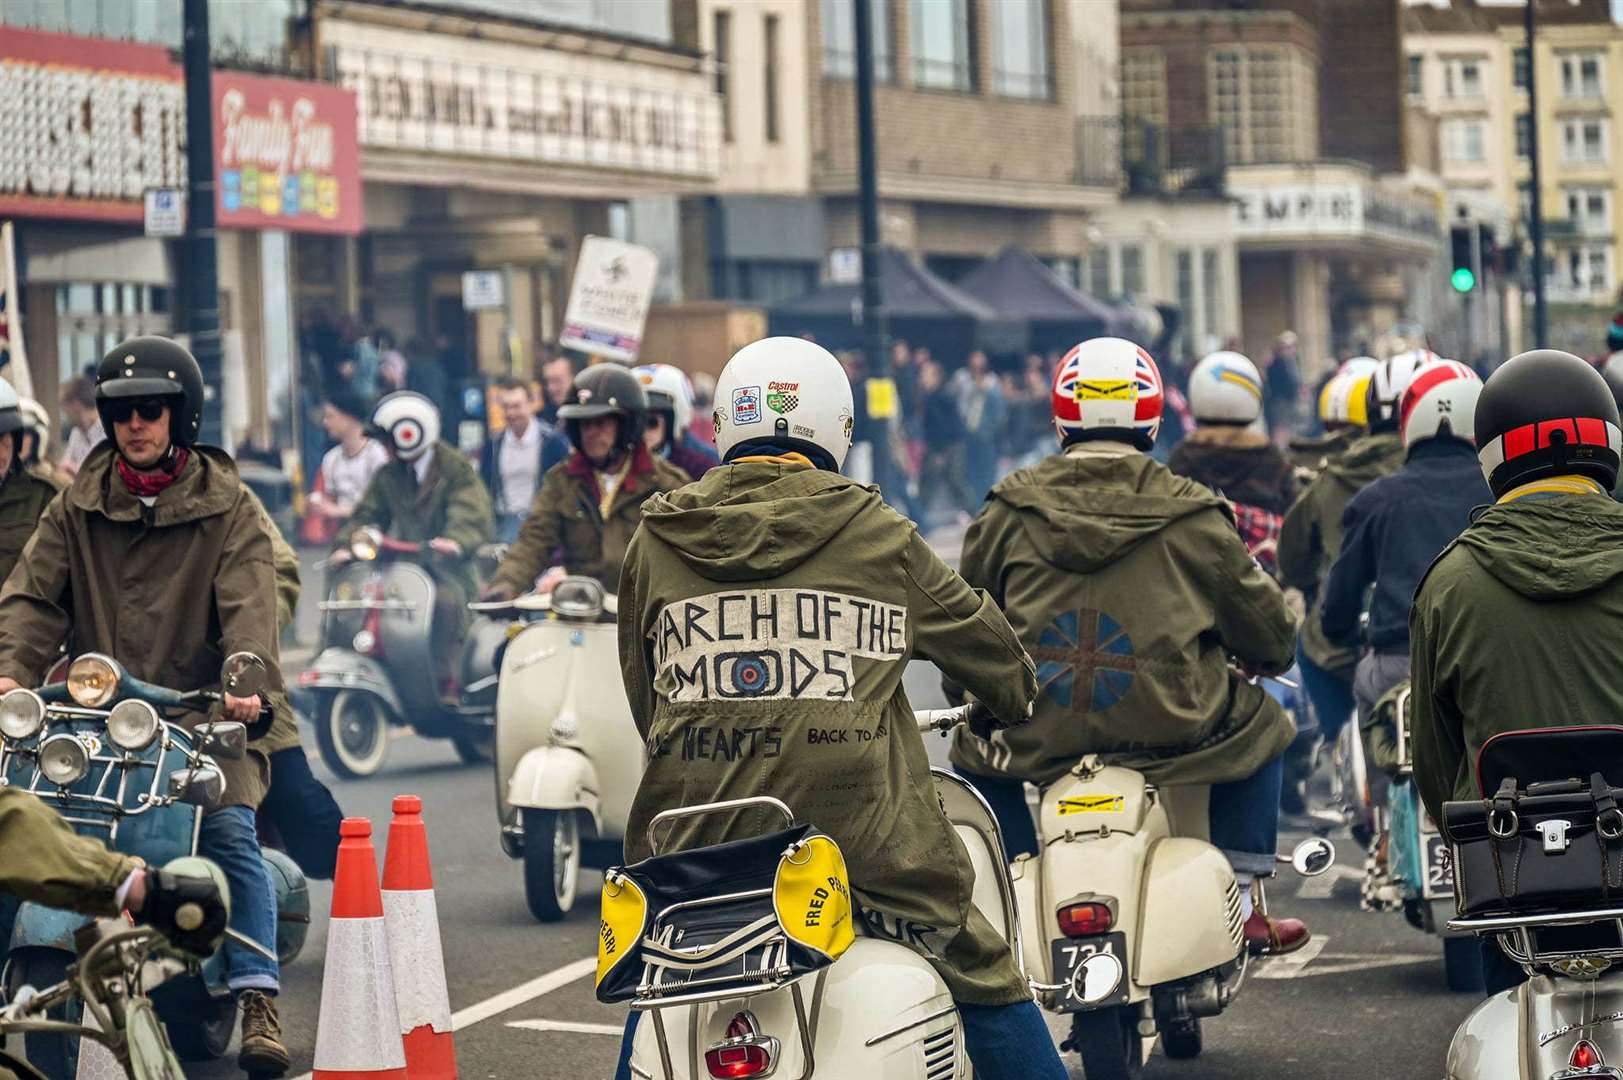 Seventy-five scooters, including Vespas and Lambrettas, were used in the scene. Picture: Steven Collis Allfields Photography